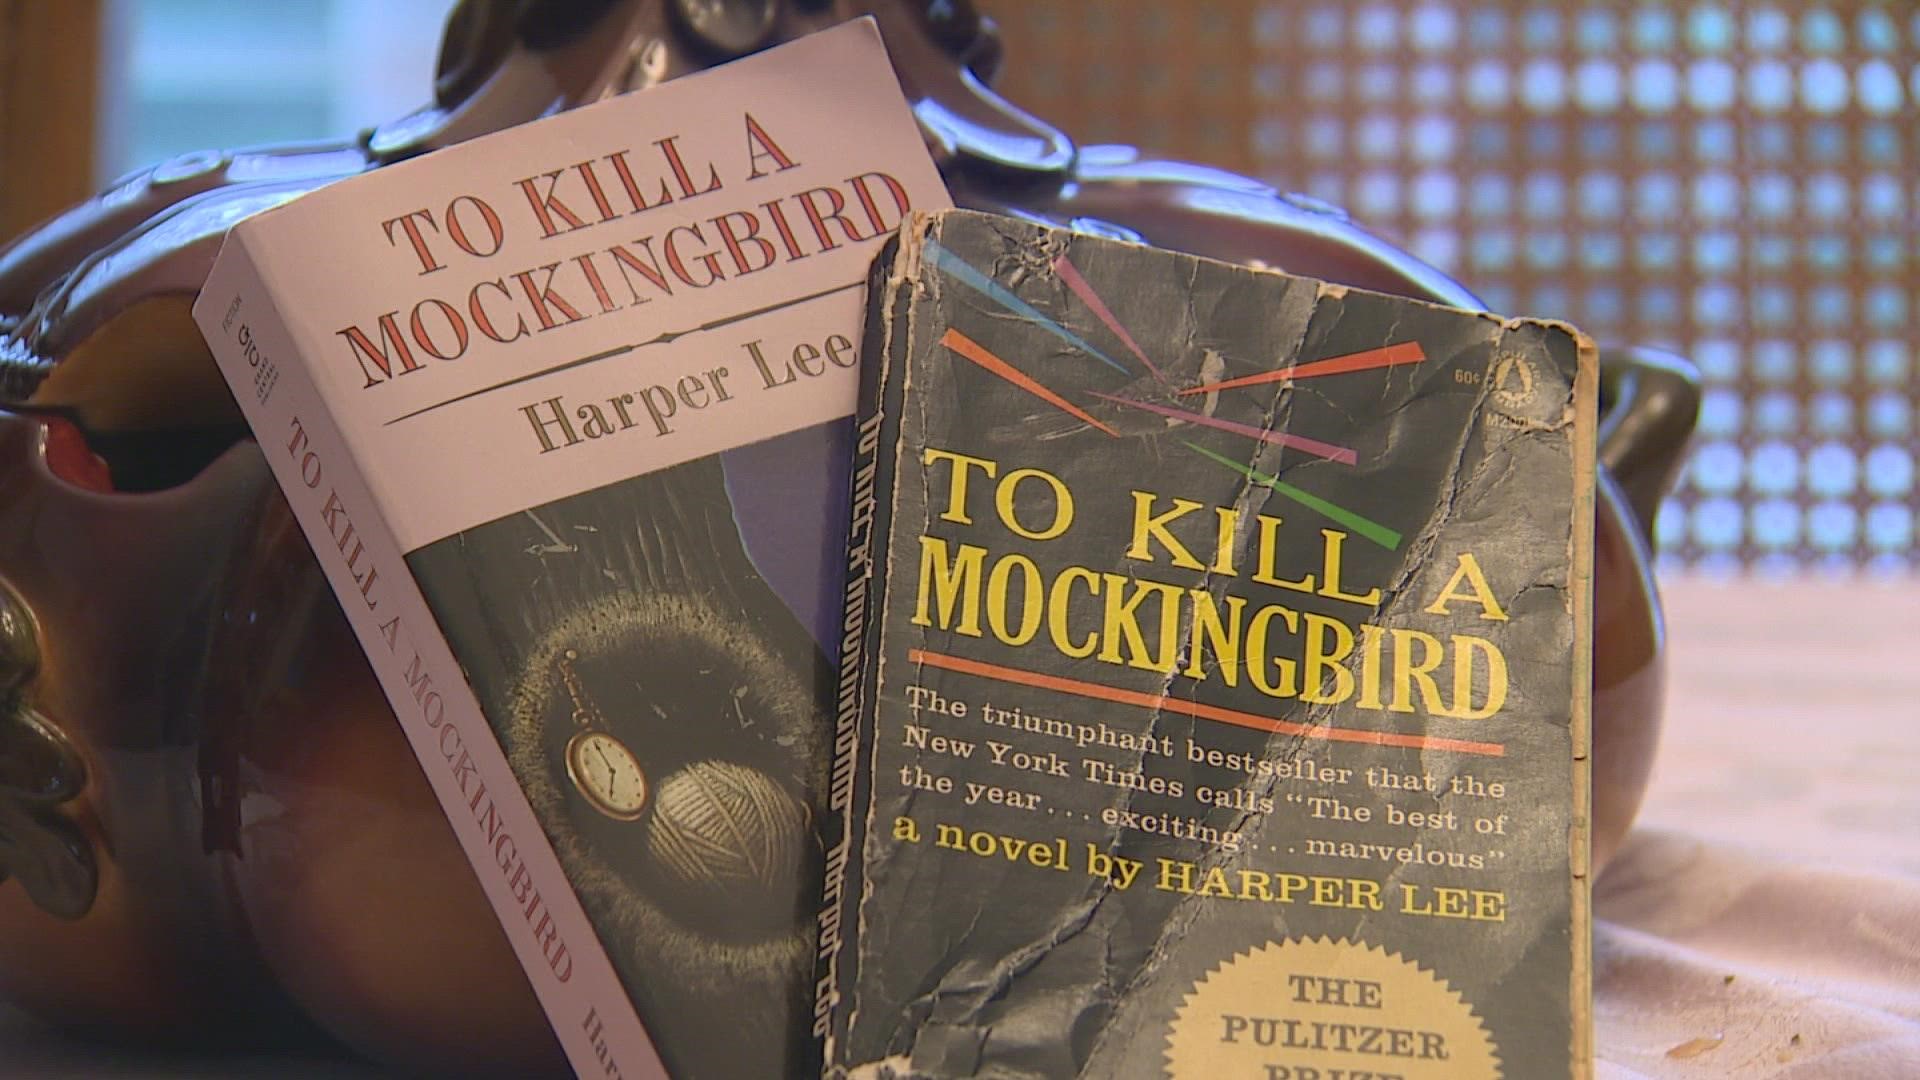 At least one parent in the district believes To Kill A Mockingbird is racially insensitive, and a committee voted 63% to remove it as required reading.